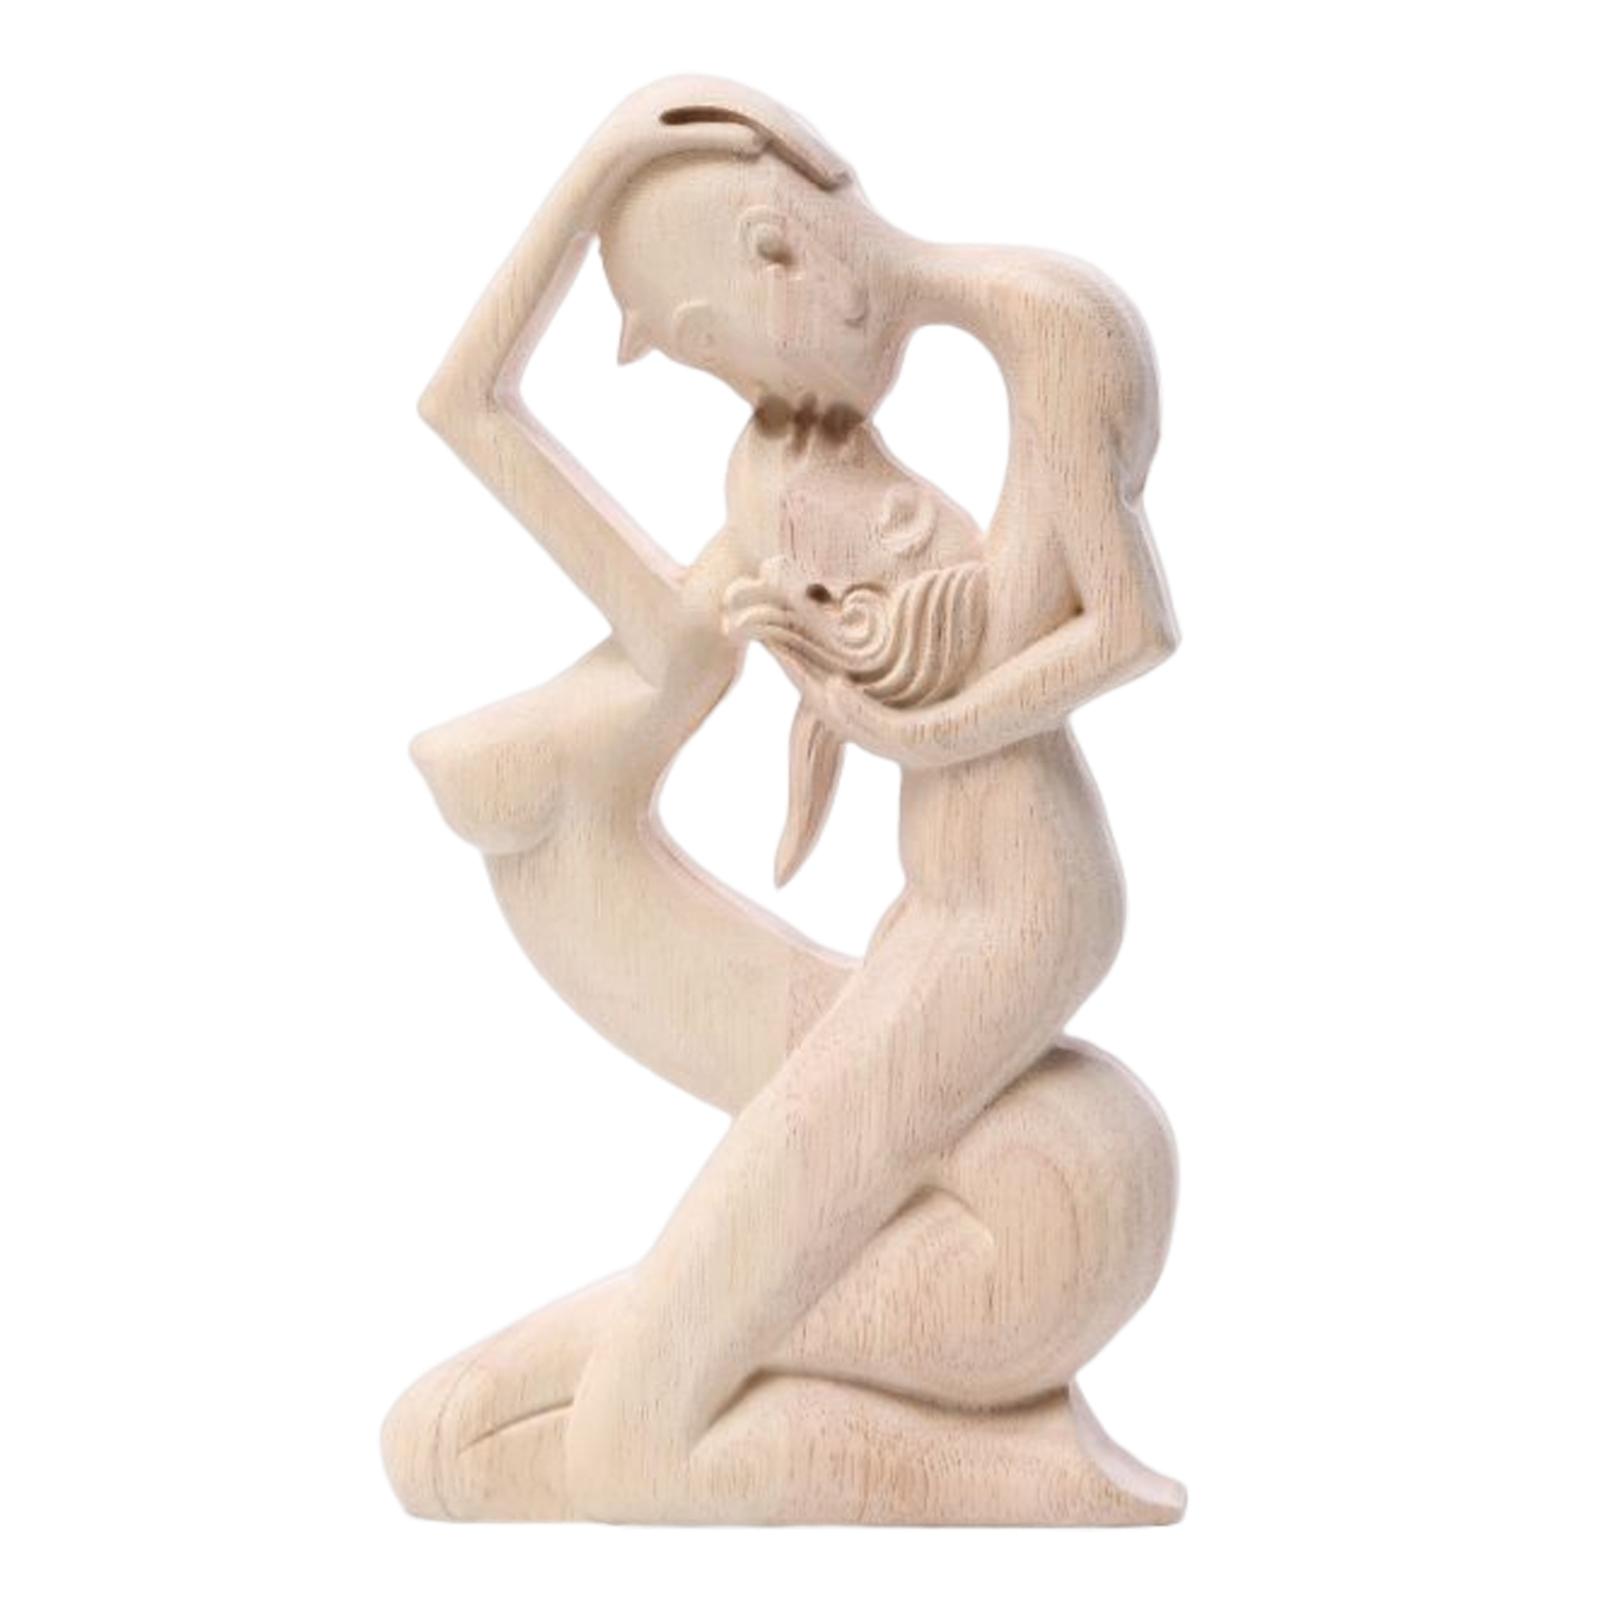 23cm Wooden Kissing Couple Statues Accent Artwork Hand Crafted Decoration